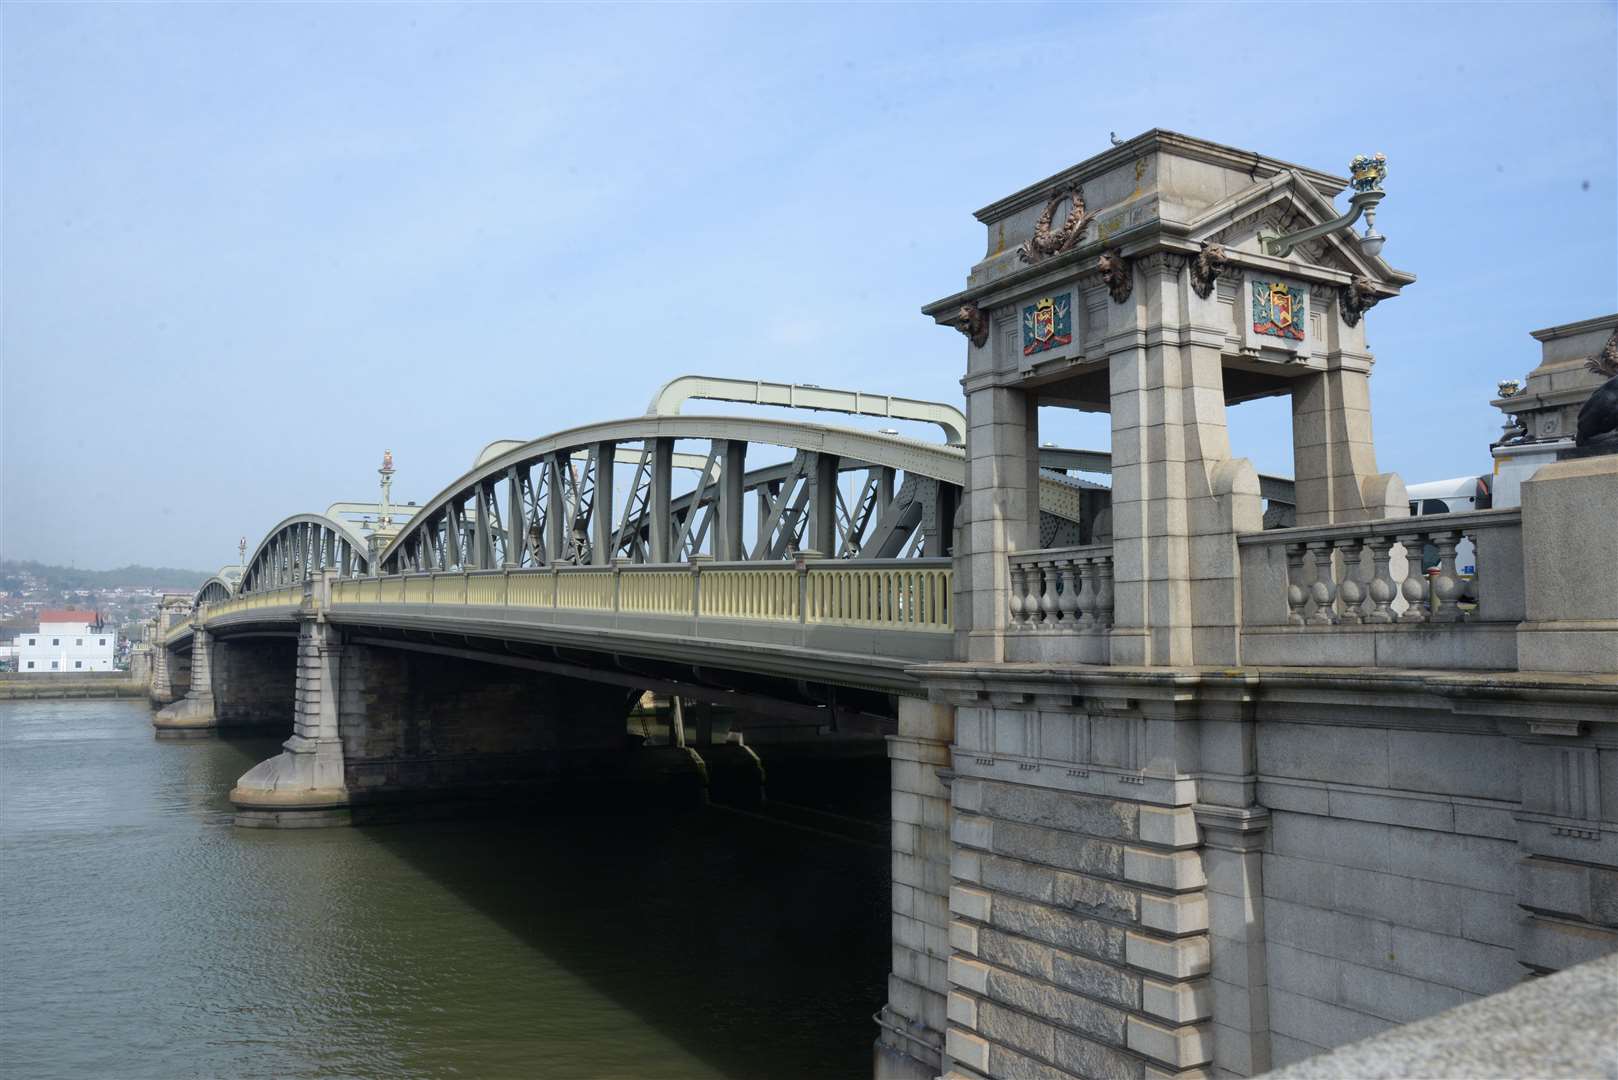 One of the main bridges maintained by the trust